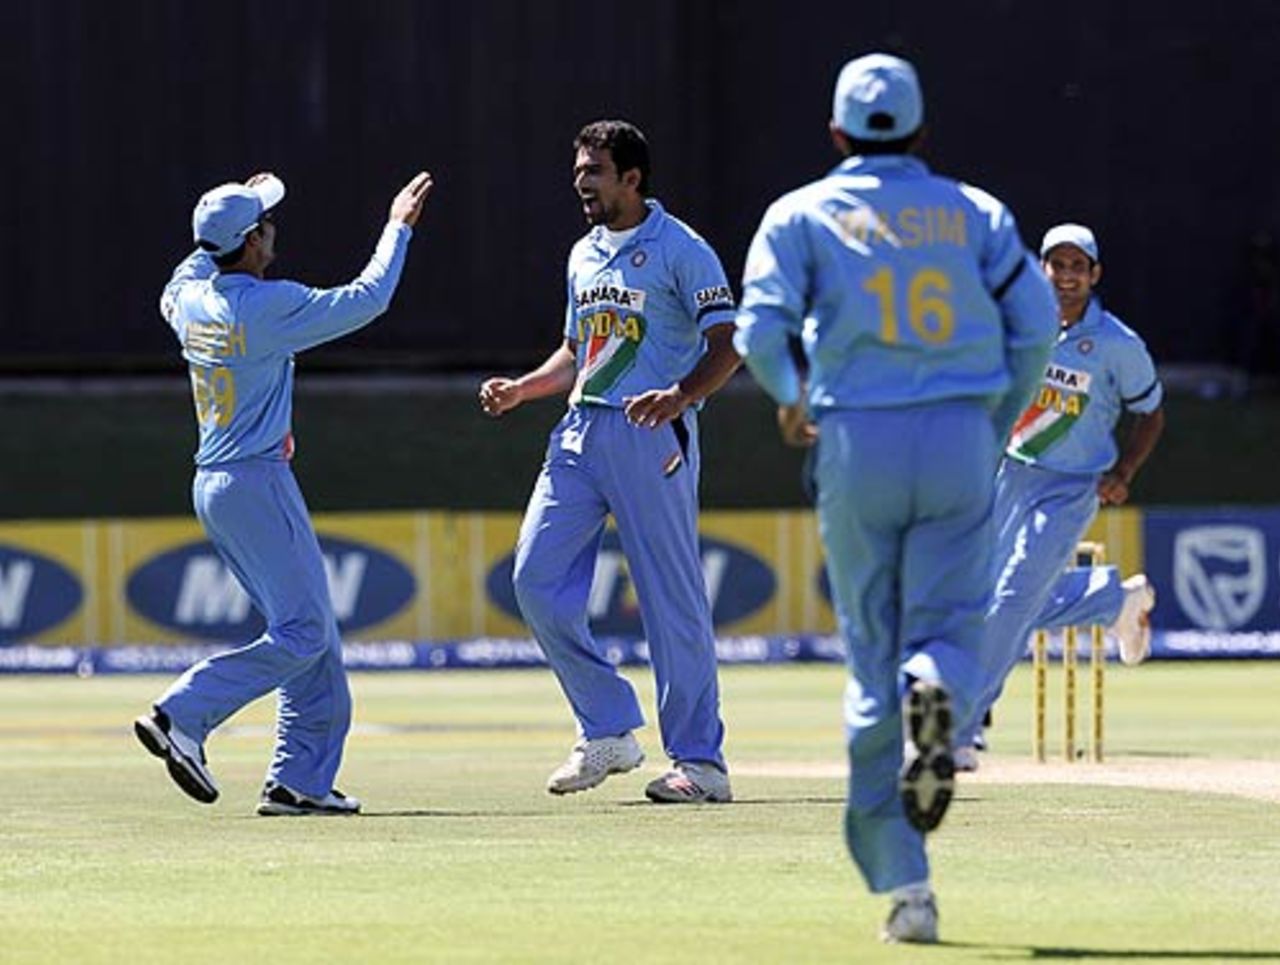 Zaheer Khan vents his feelings after nailing Graeme Smith in the first over, South Africa v India, 4th ODI, Port Elizabeth, November 29, 2006